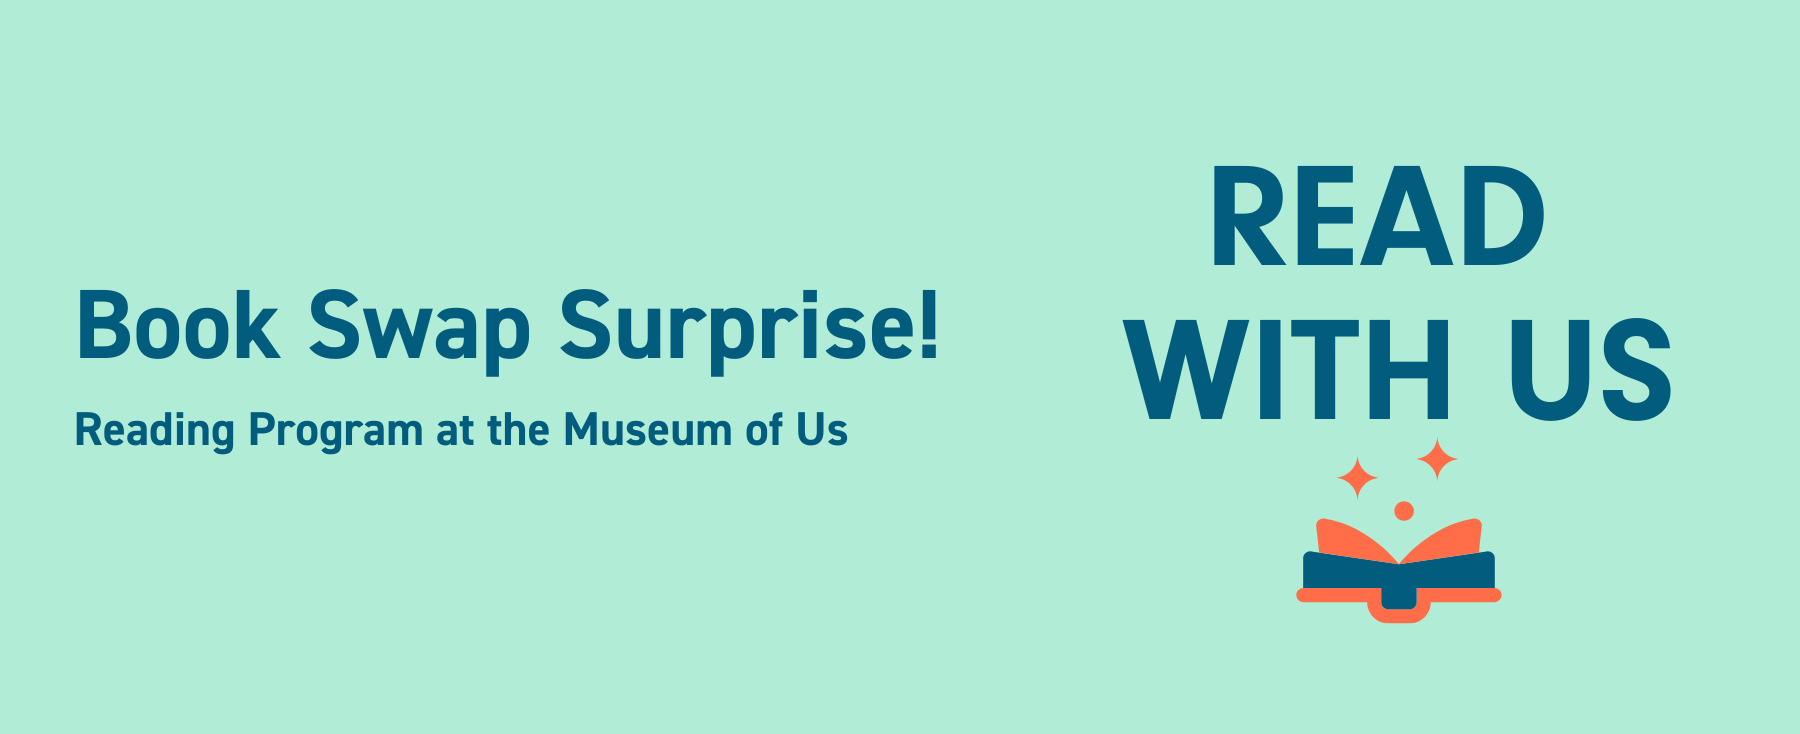 A graphic image on a light blue background with dark blue text that says Book Swap Surprise! Reading Program at the Museum of Us READ WITH US